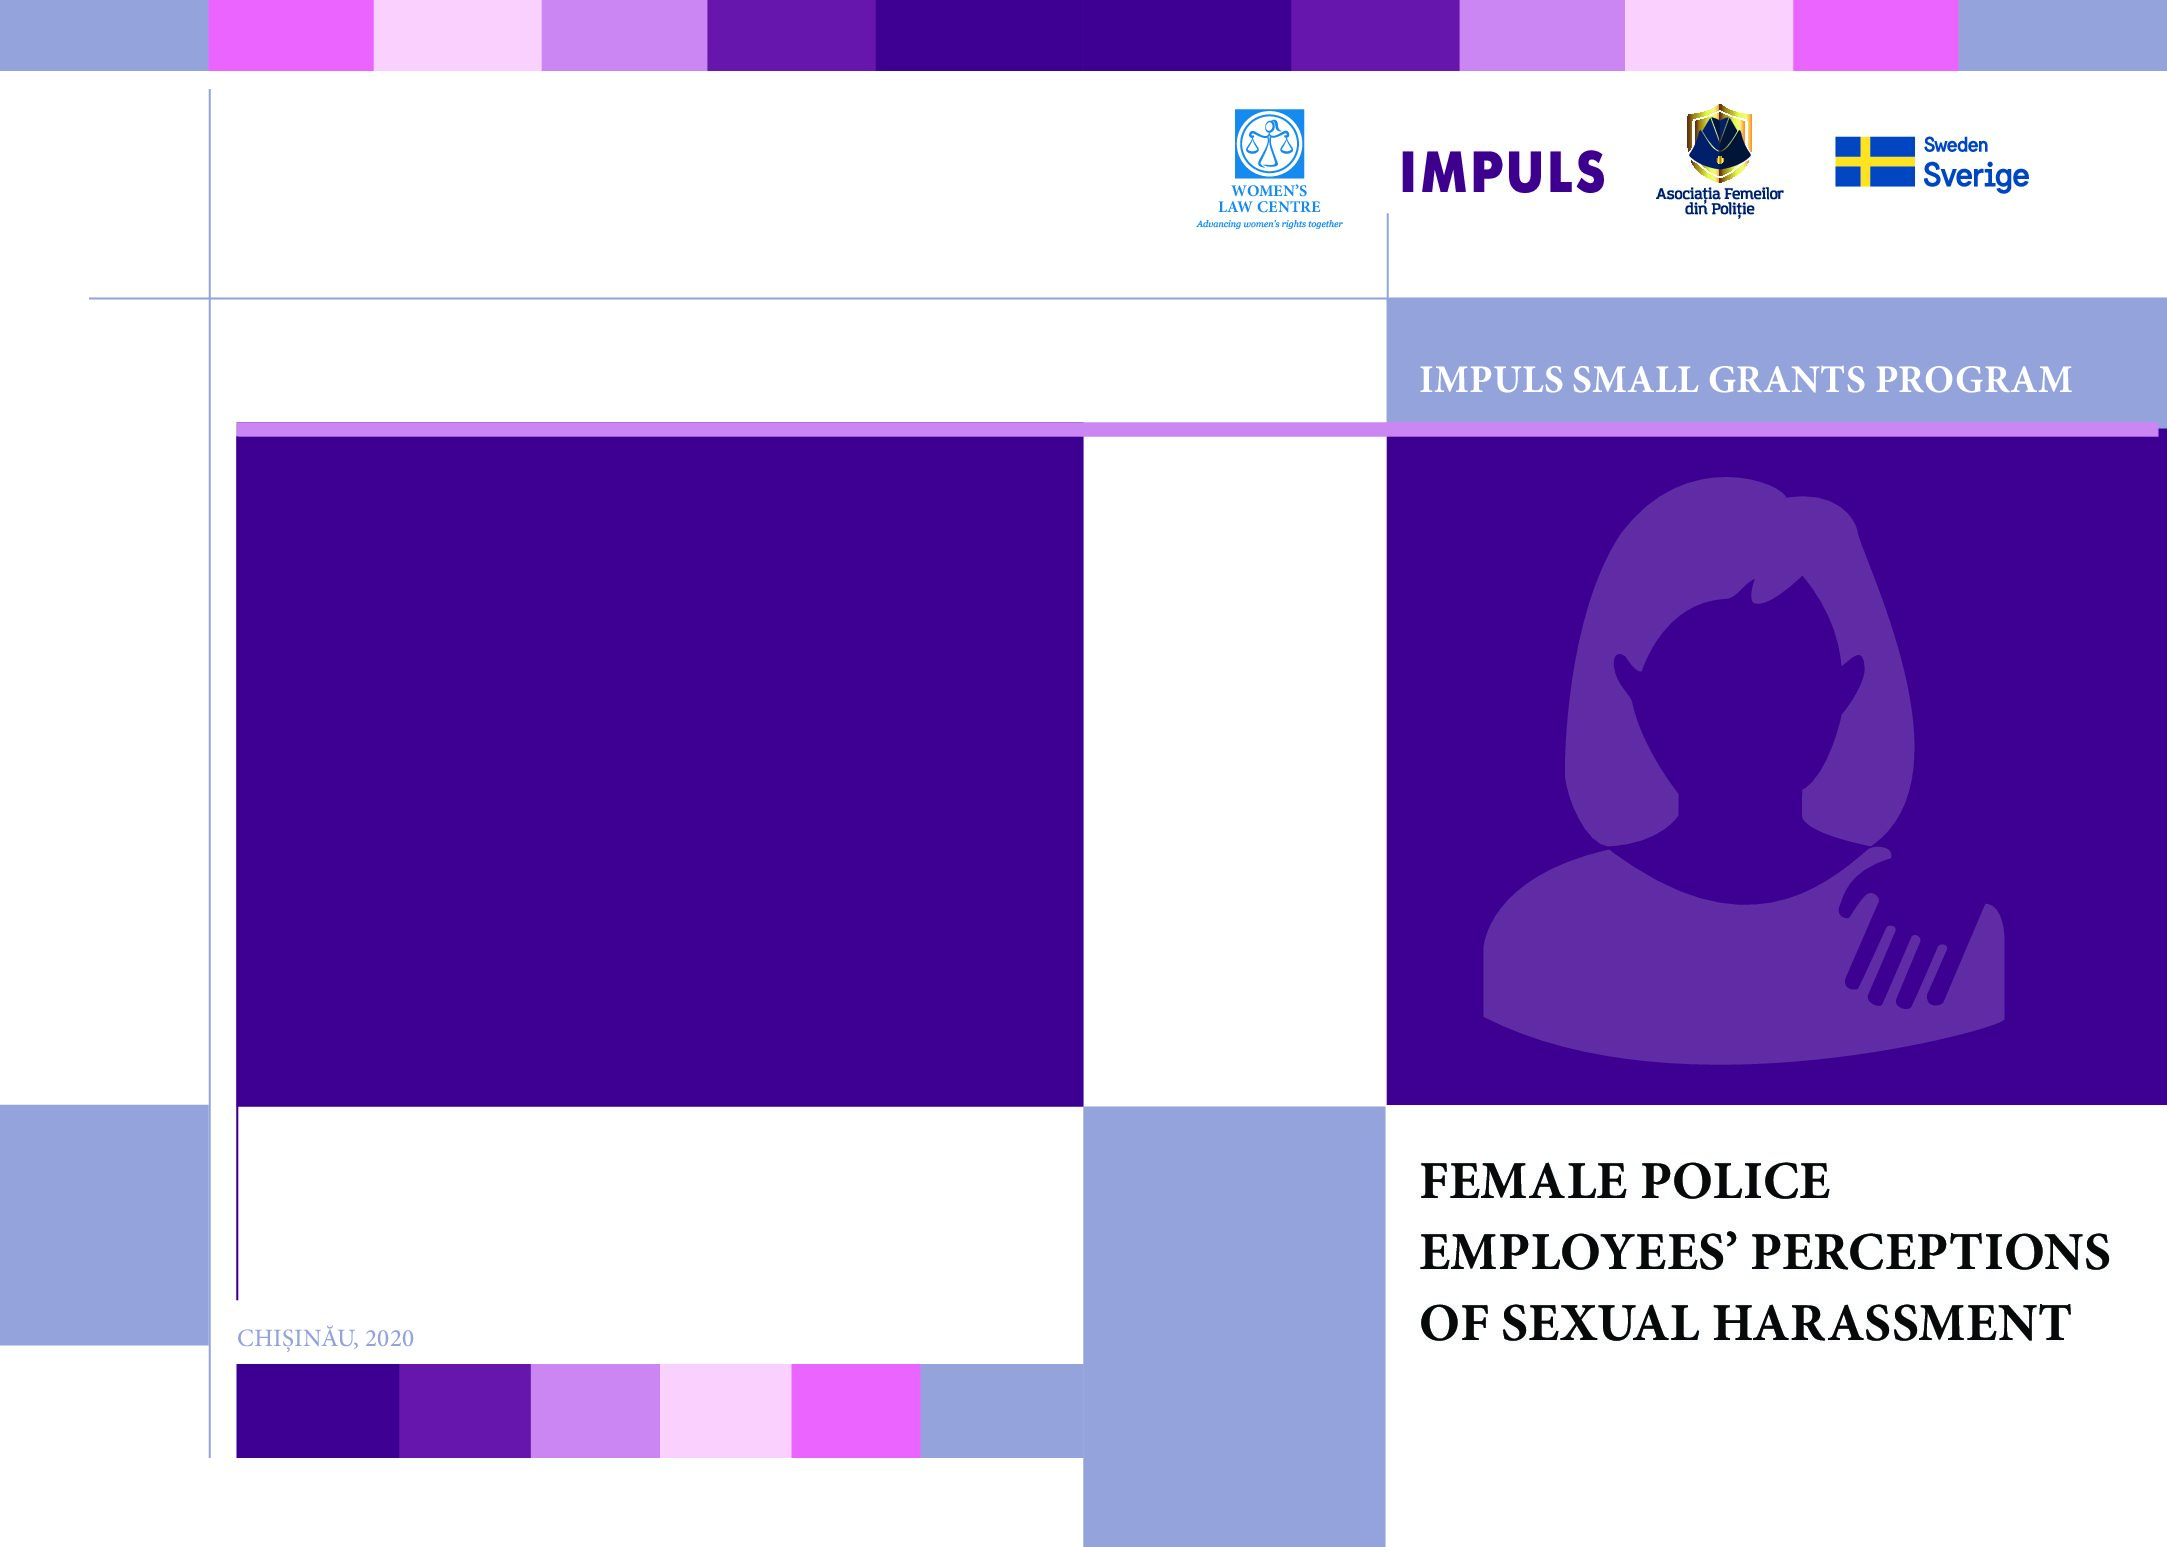 Female police employees’ perceptions of sexual harassment